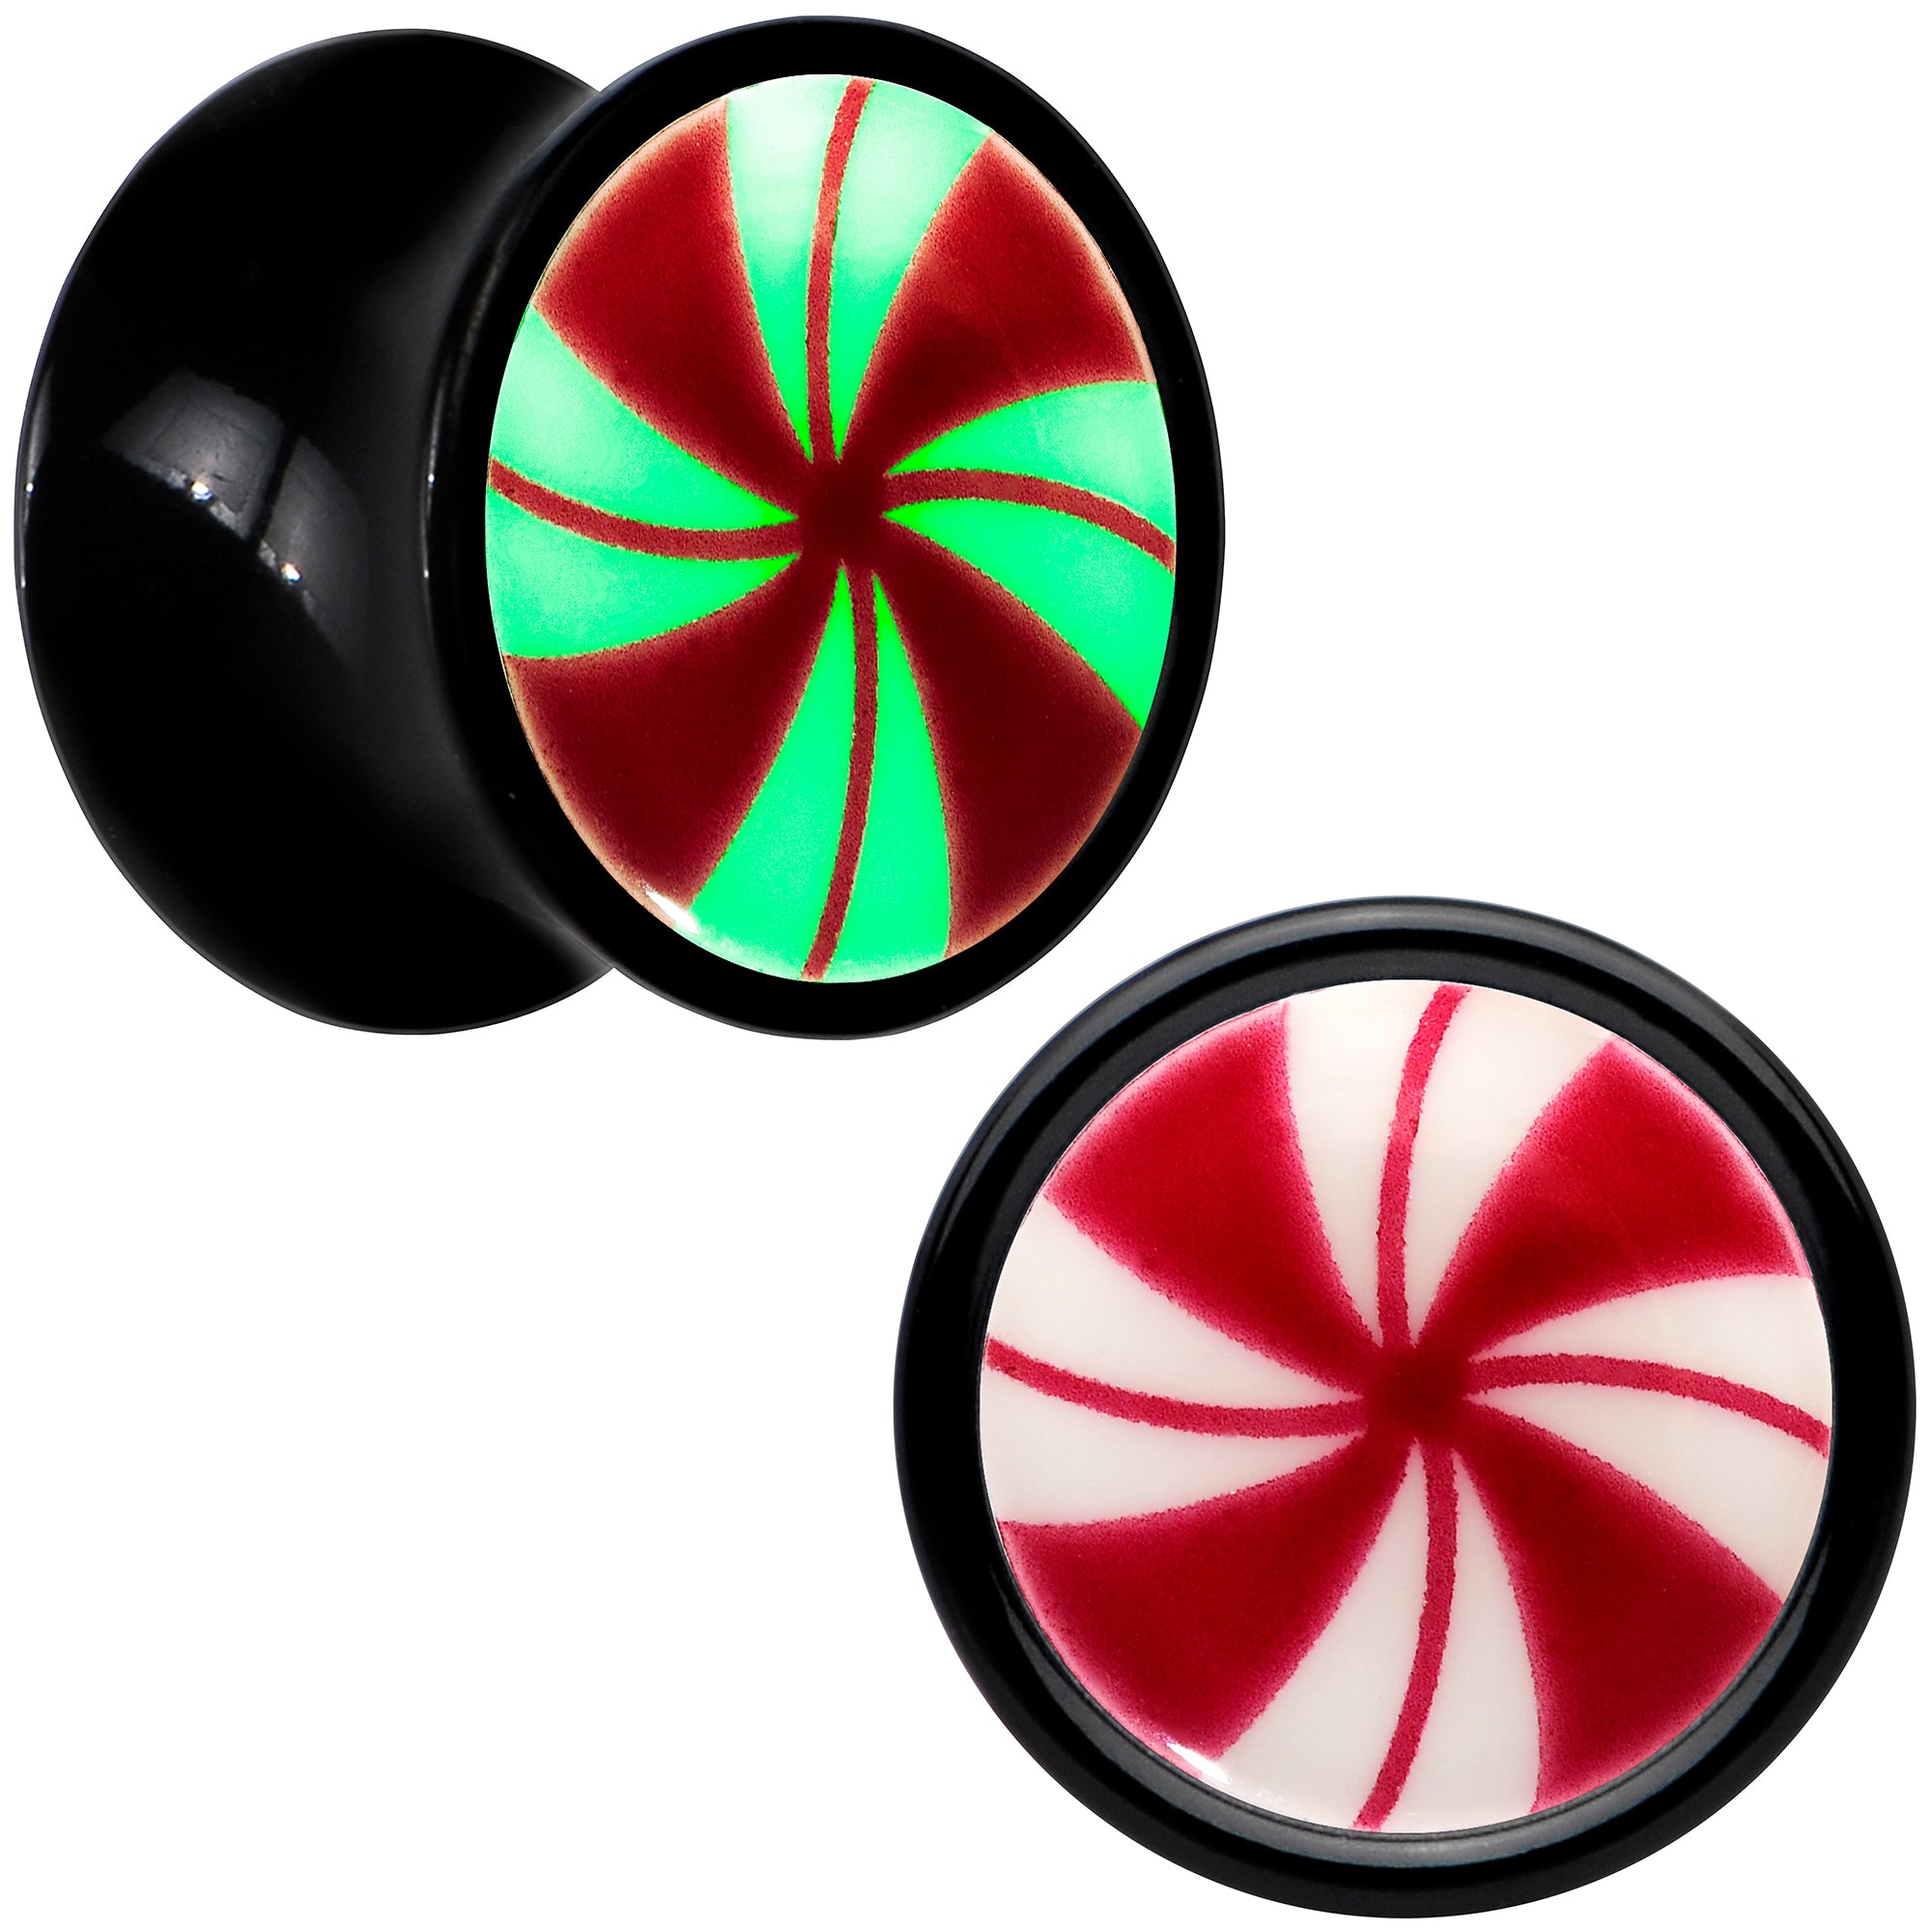 Black Acrylic Peppermint Candy Glow in Dark Double Flare Plug Set